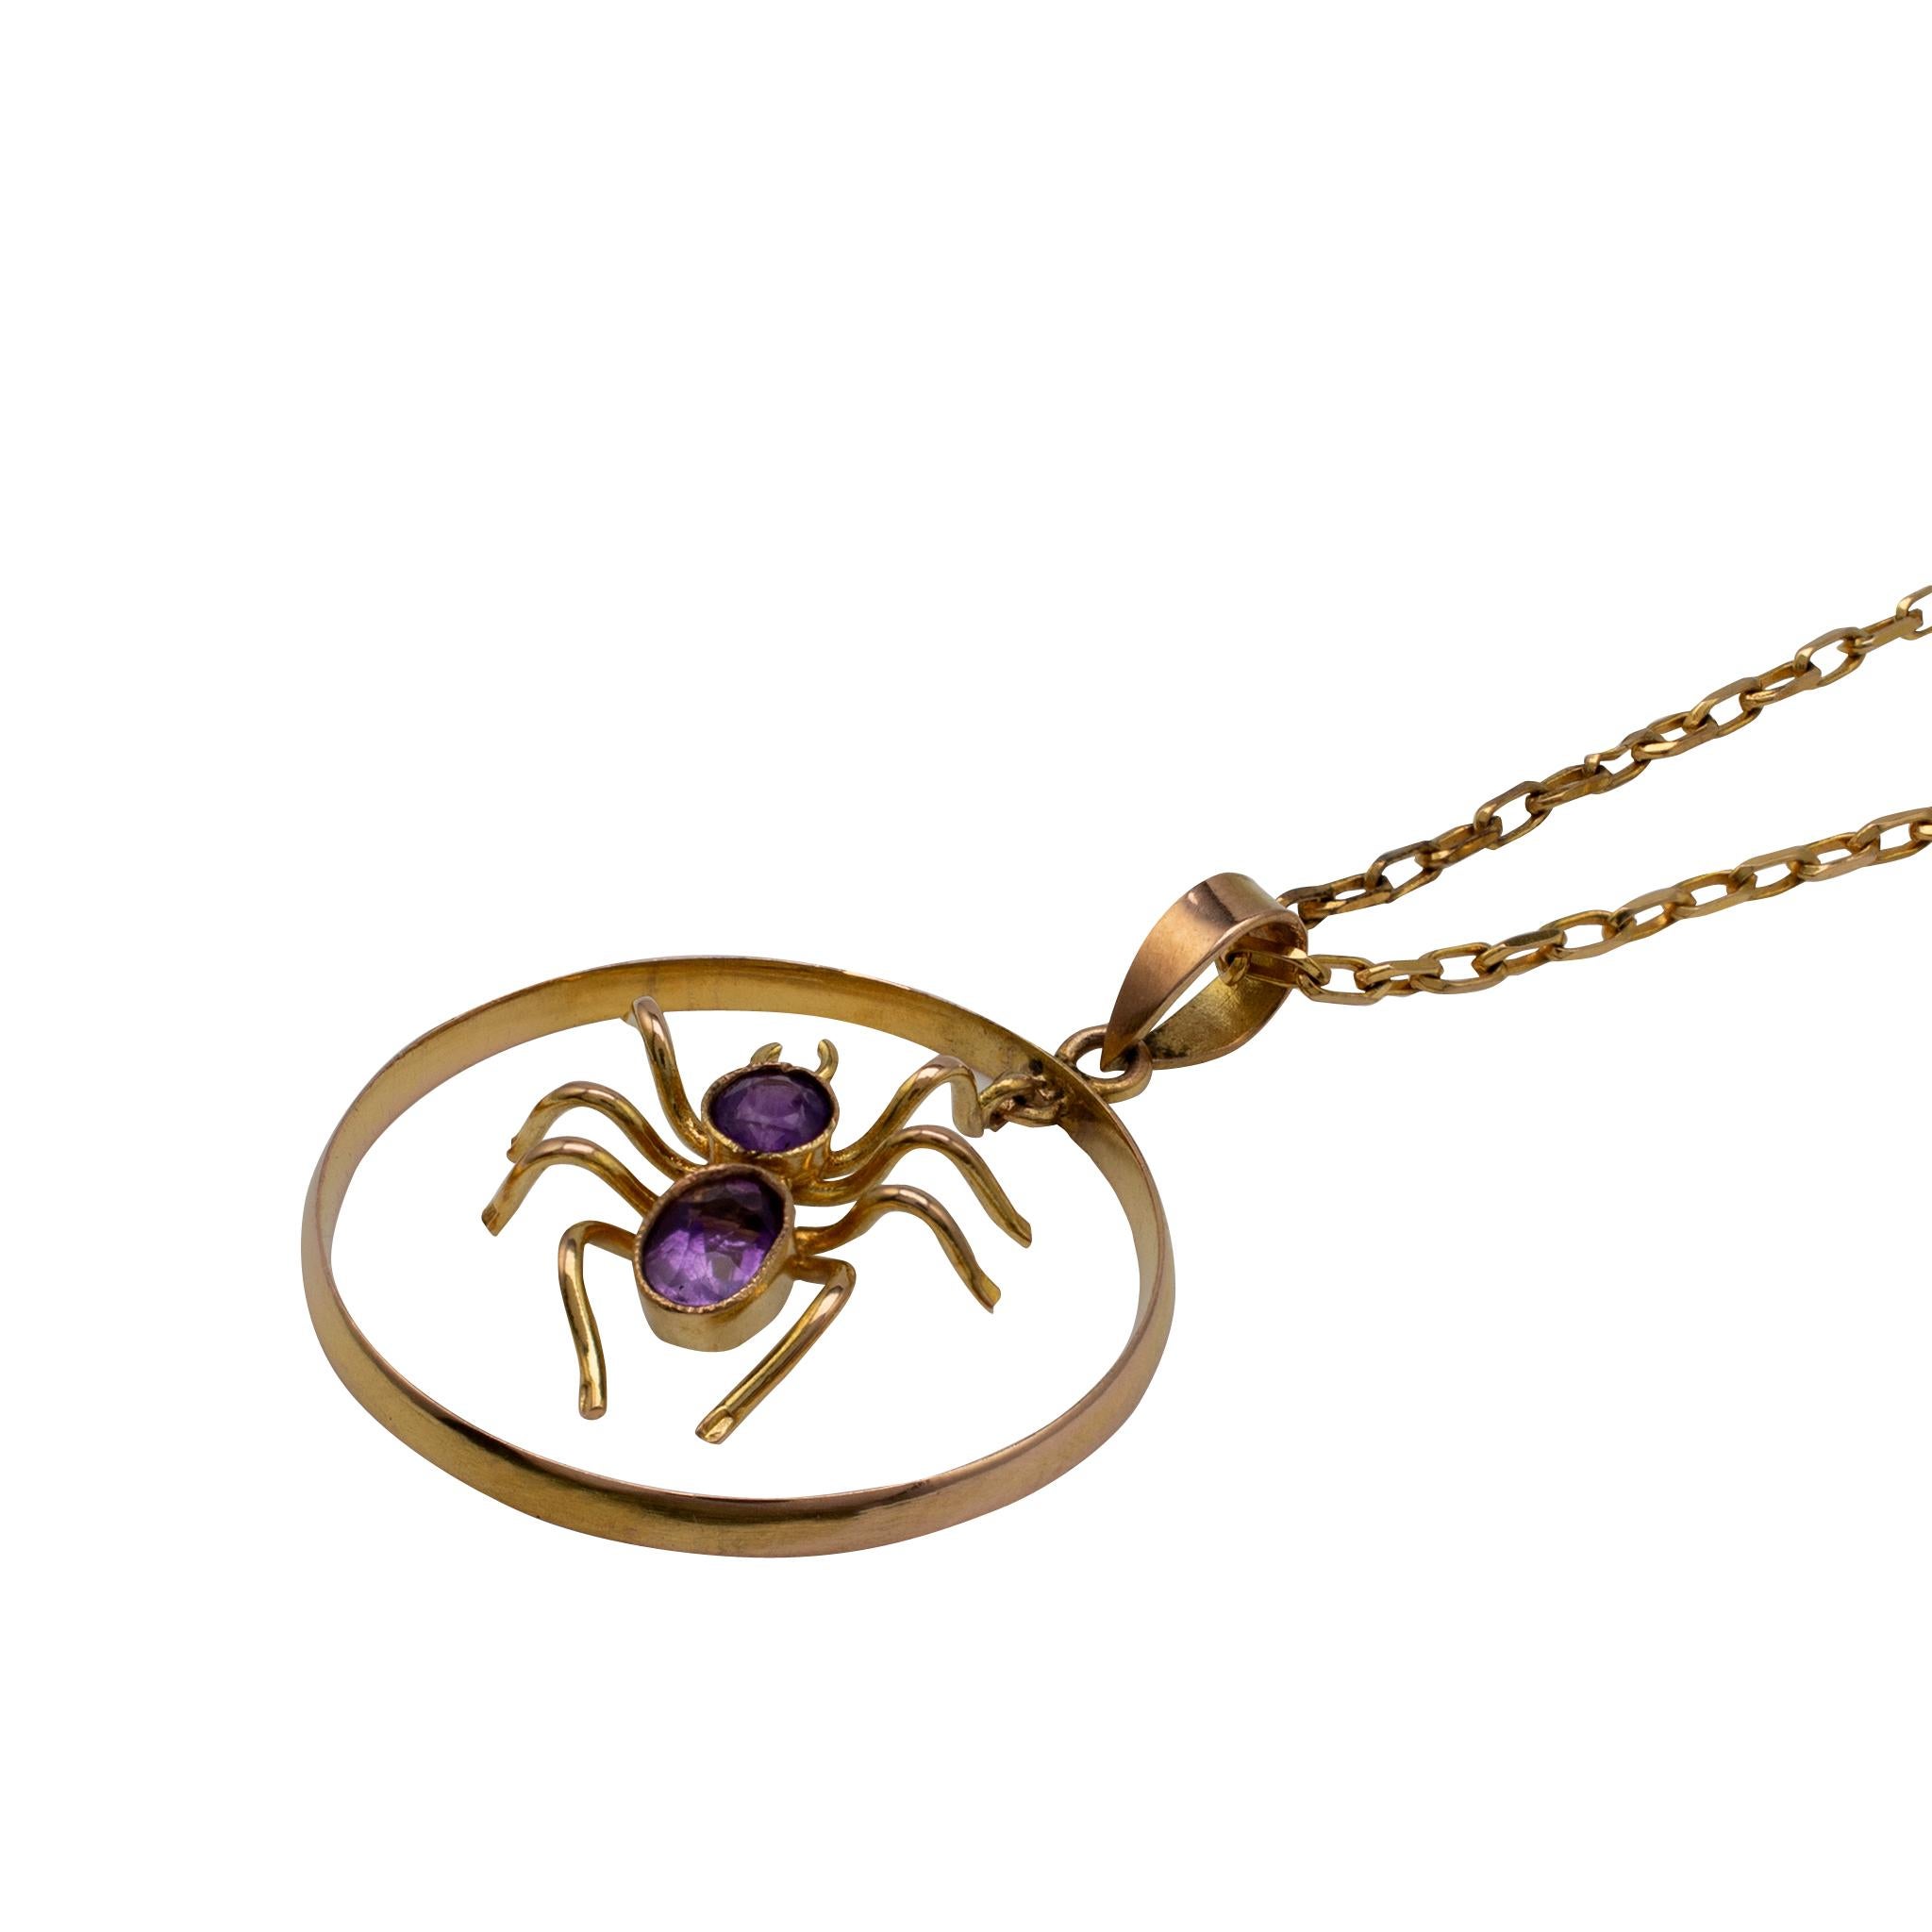 This fantastic spider insect pendant necklace comes complete with 16-inch gold chain. The antique-inspired piece features a dangling spider bezel set with oval and round cut amethyst gemstones.

Presented in very good condition with a neat